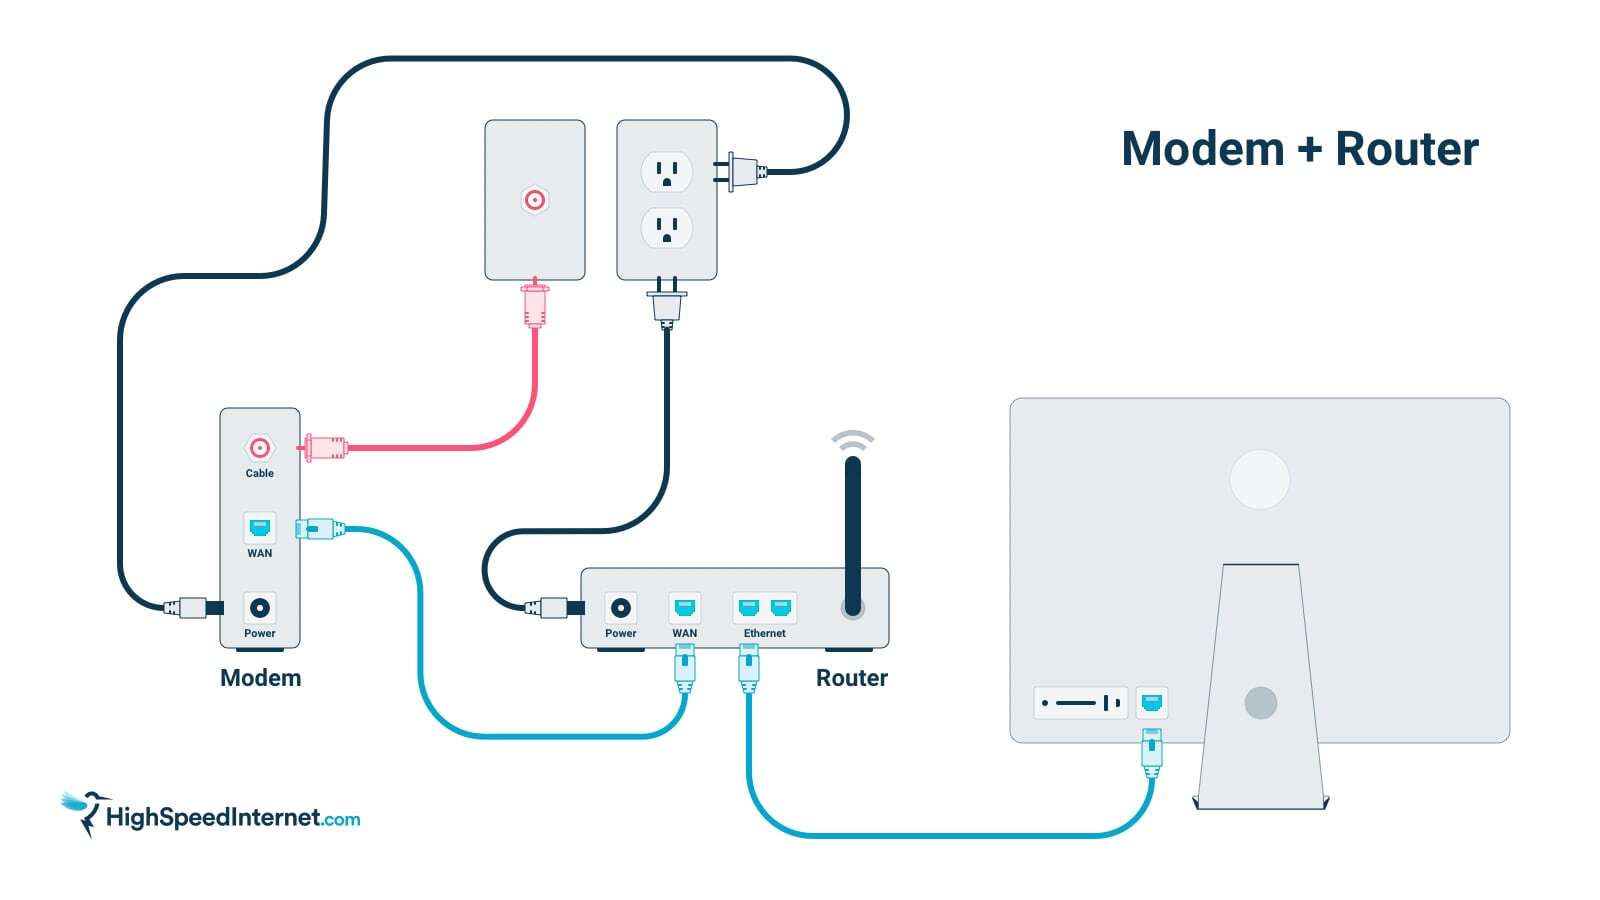 titel Vil have Vurdering How to Connect Ethernet Cable to Wireless Router | HighSpeedInternet.com